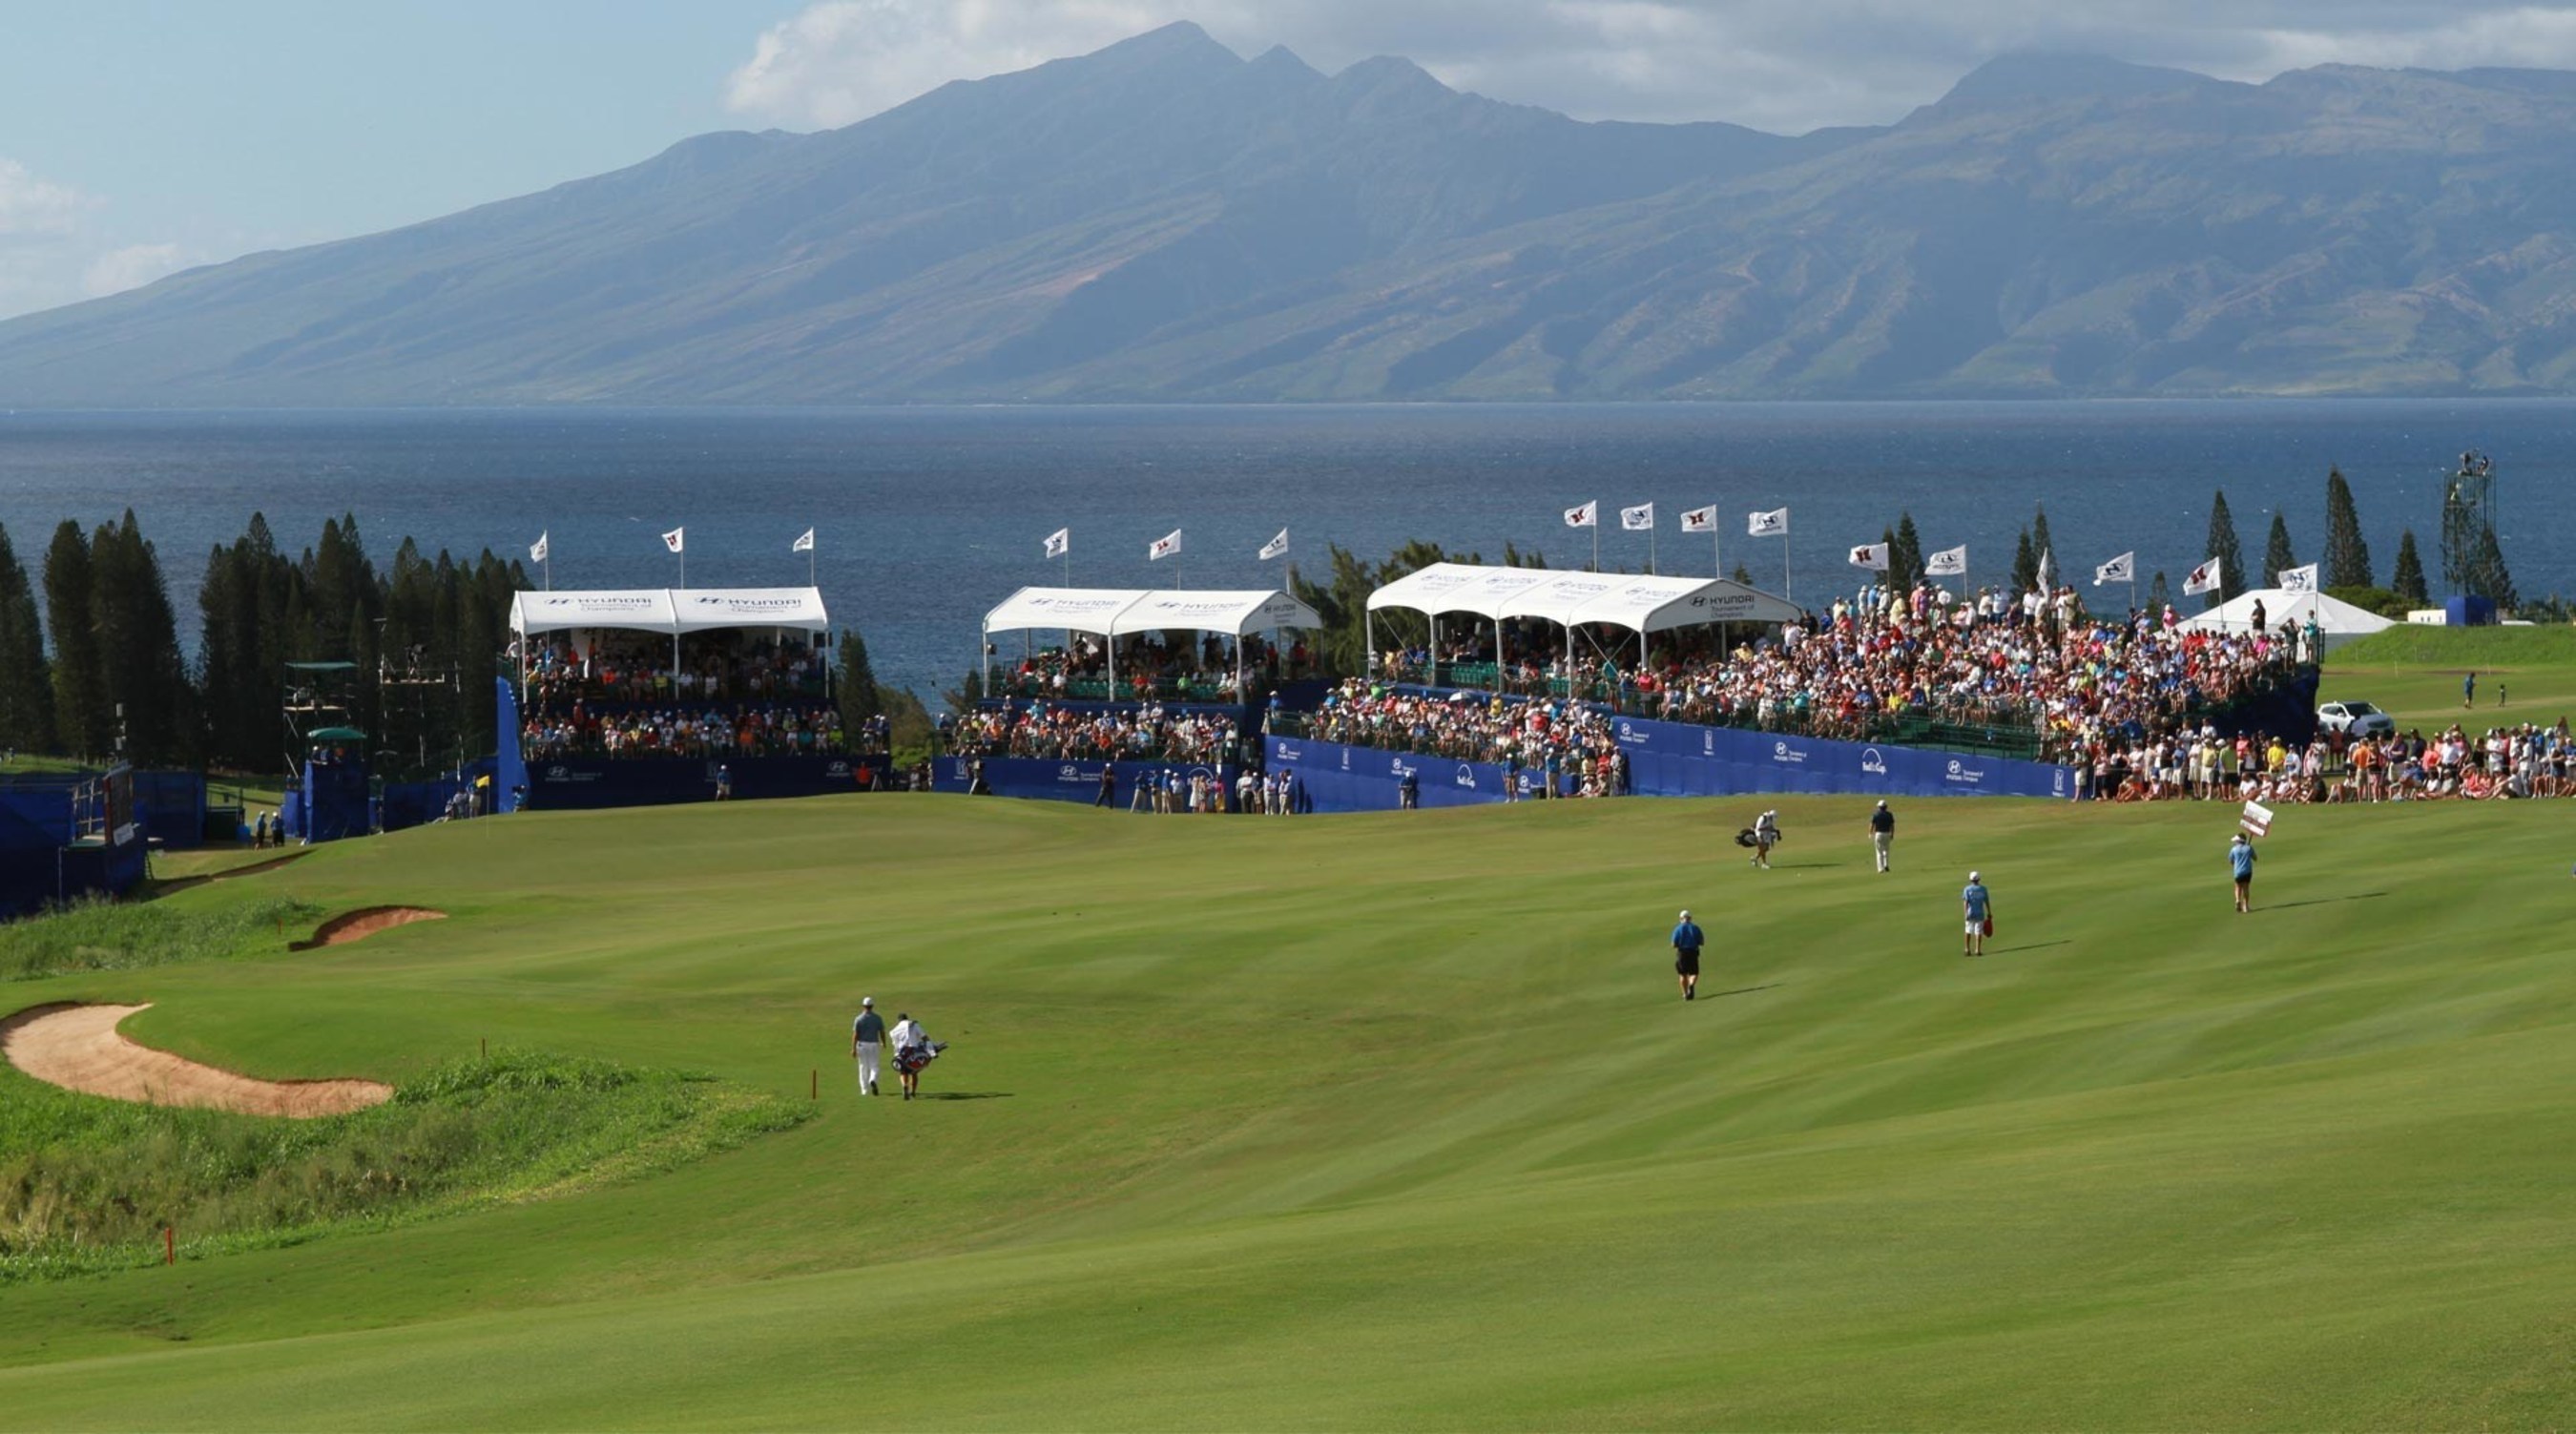 The Hyundai Tournament of Champions starts this week in Maui featuring 34 PGA TOUR winners from 2014.